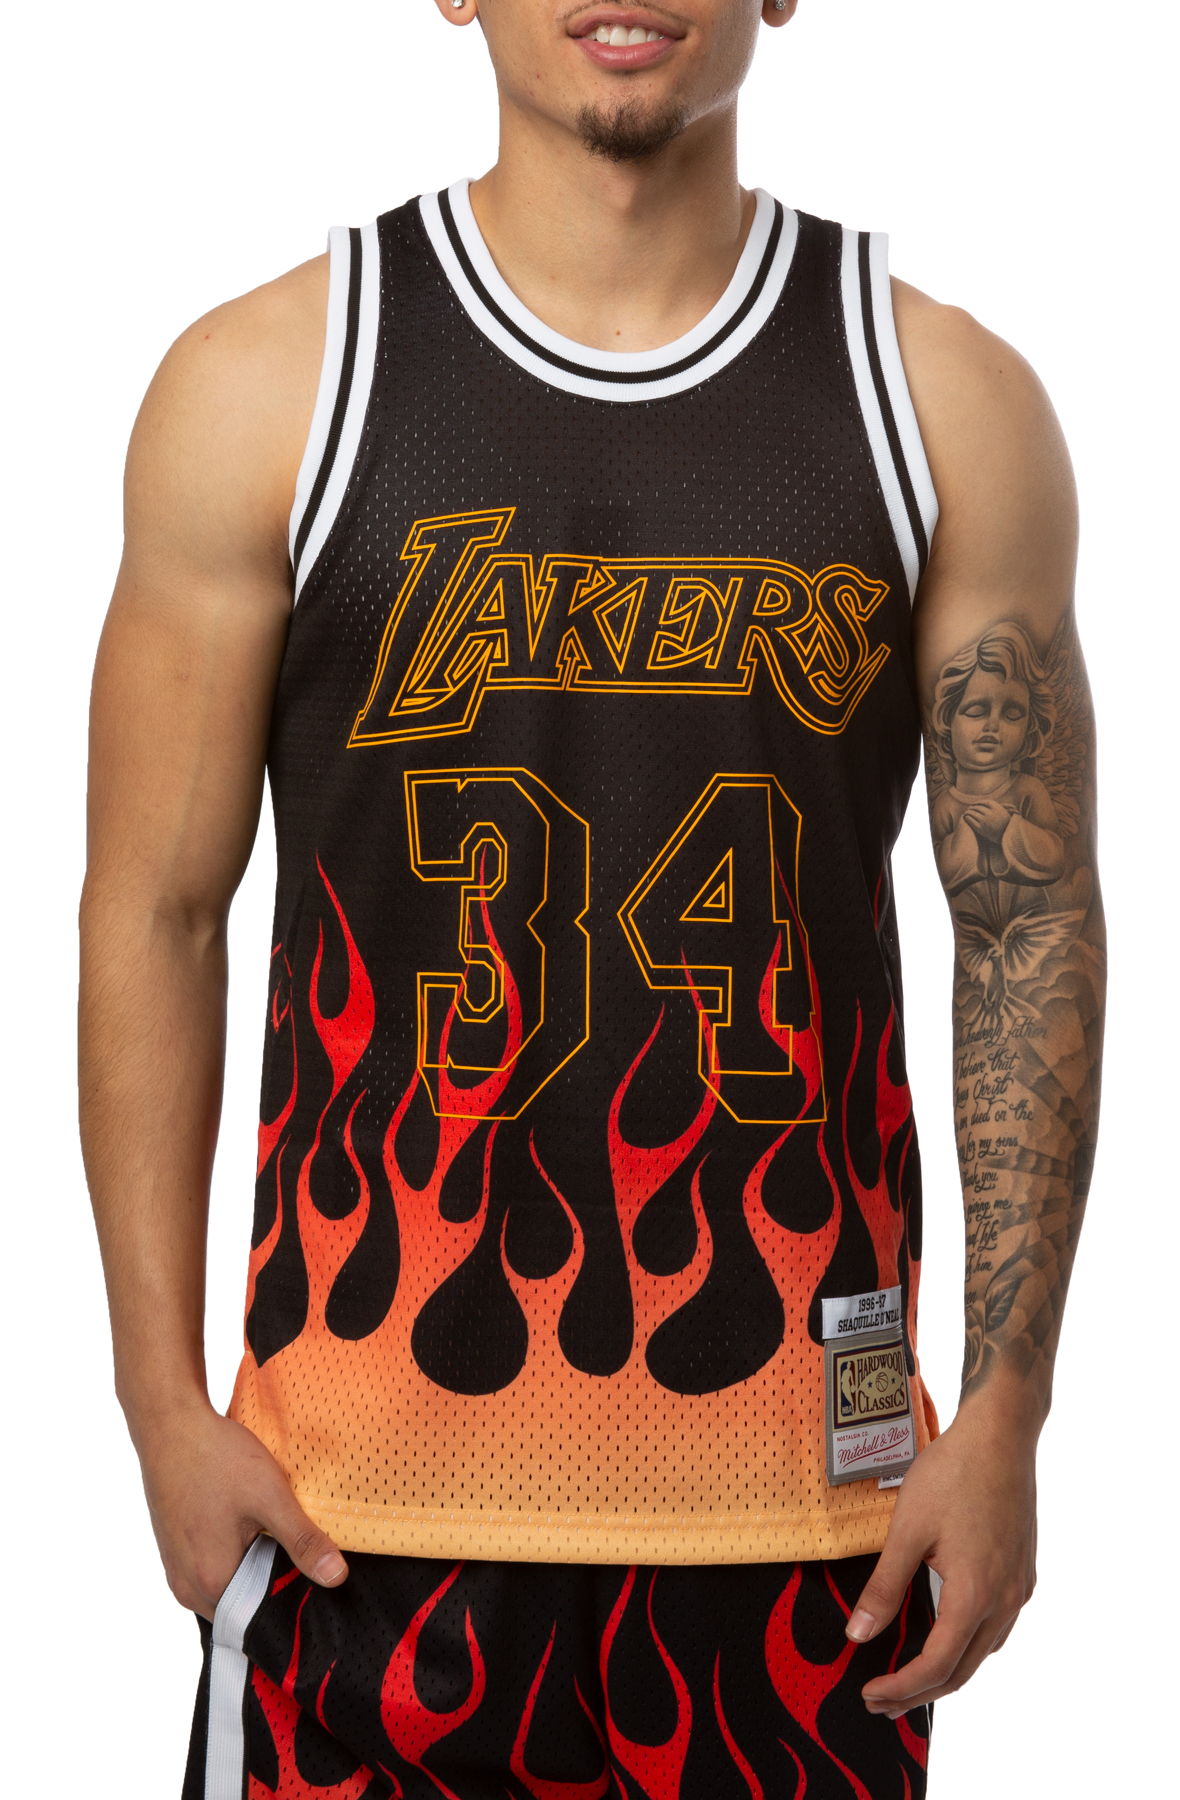 Shaquille O'Neal Los Angeles Lakers Mitchell & Ness 1996/97 Hardwood  Classics Fadeaway Swingman Player